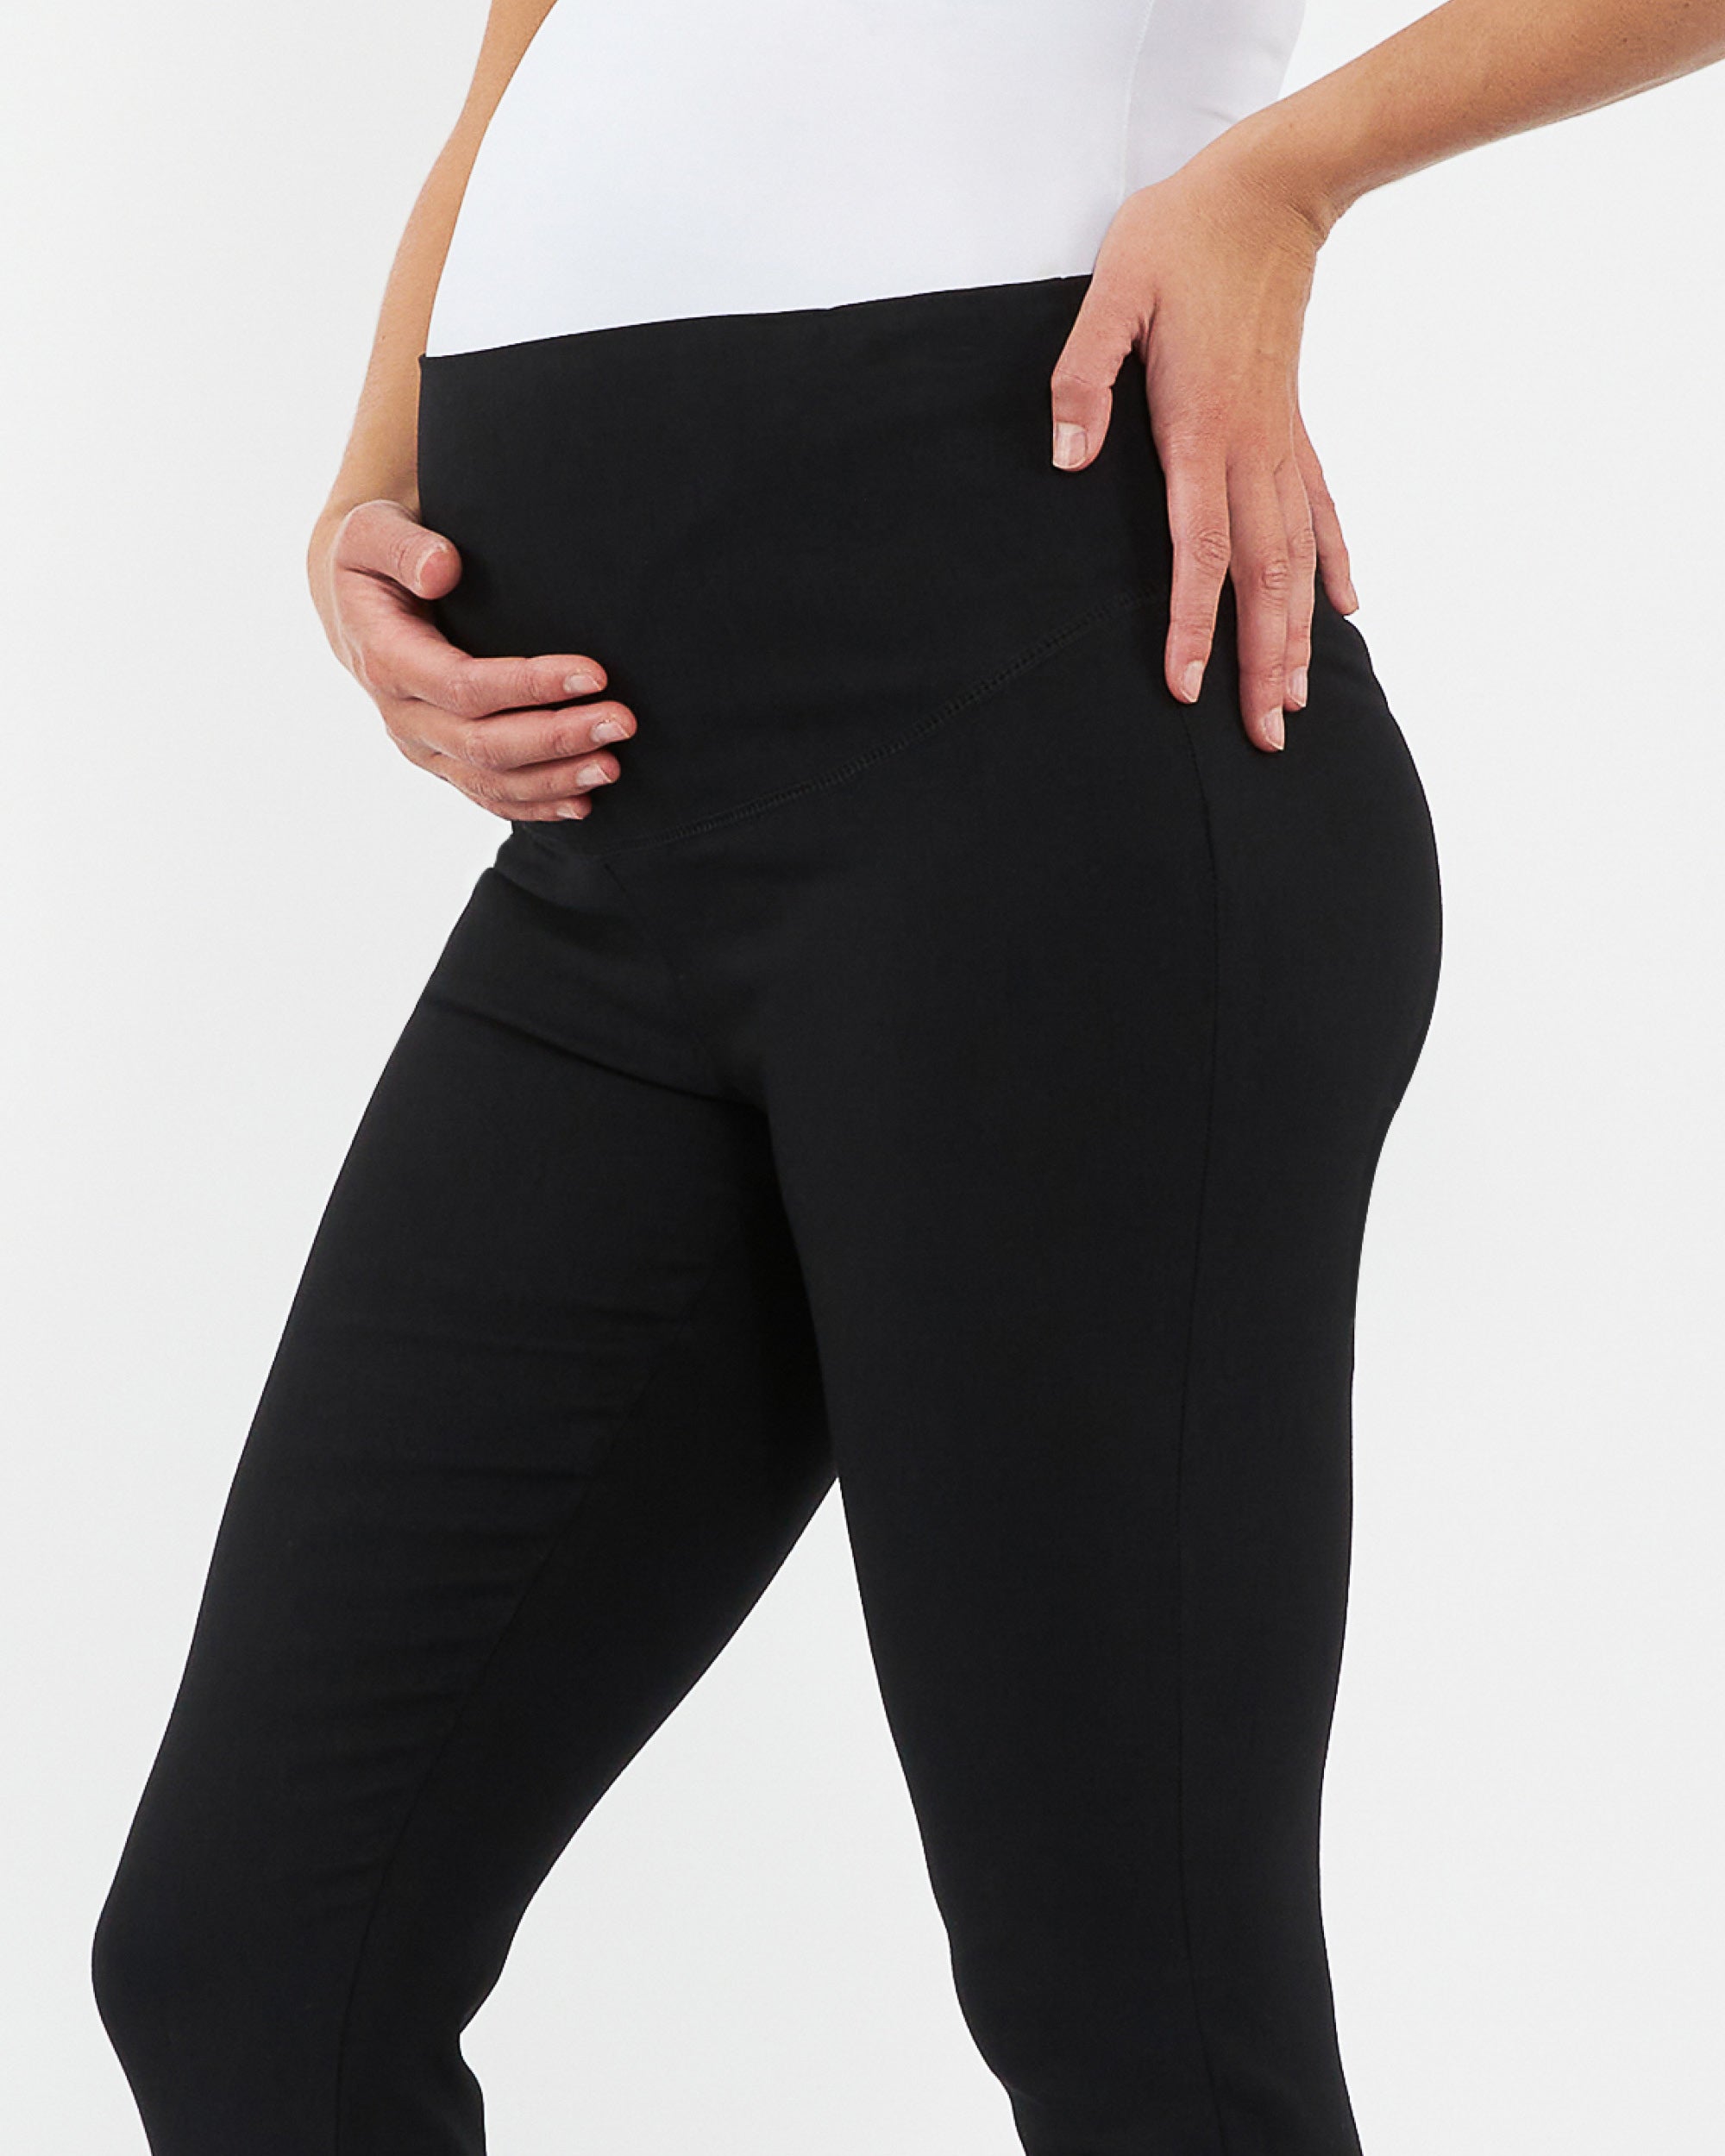 Maternity Capris for Women Over The Belly,Pregnancy Capri Leggings Active  with Pockets Yoga Pants Black